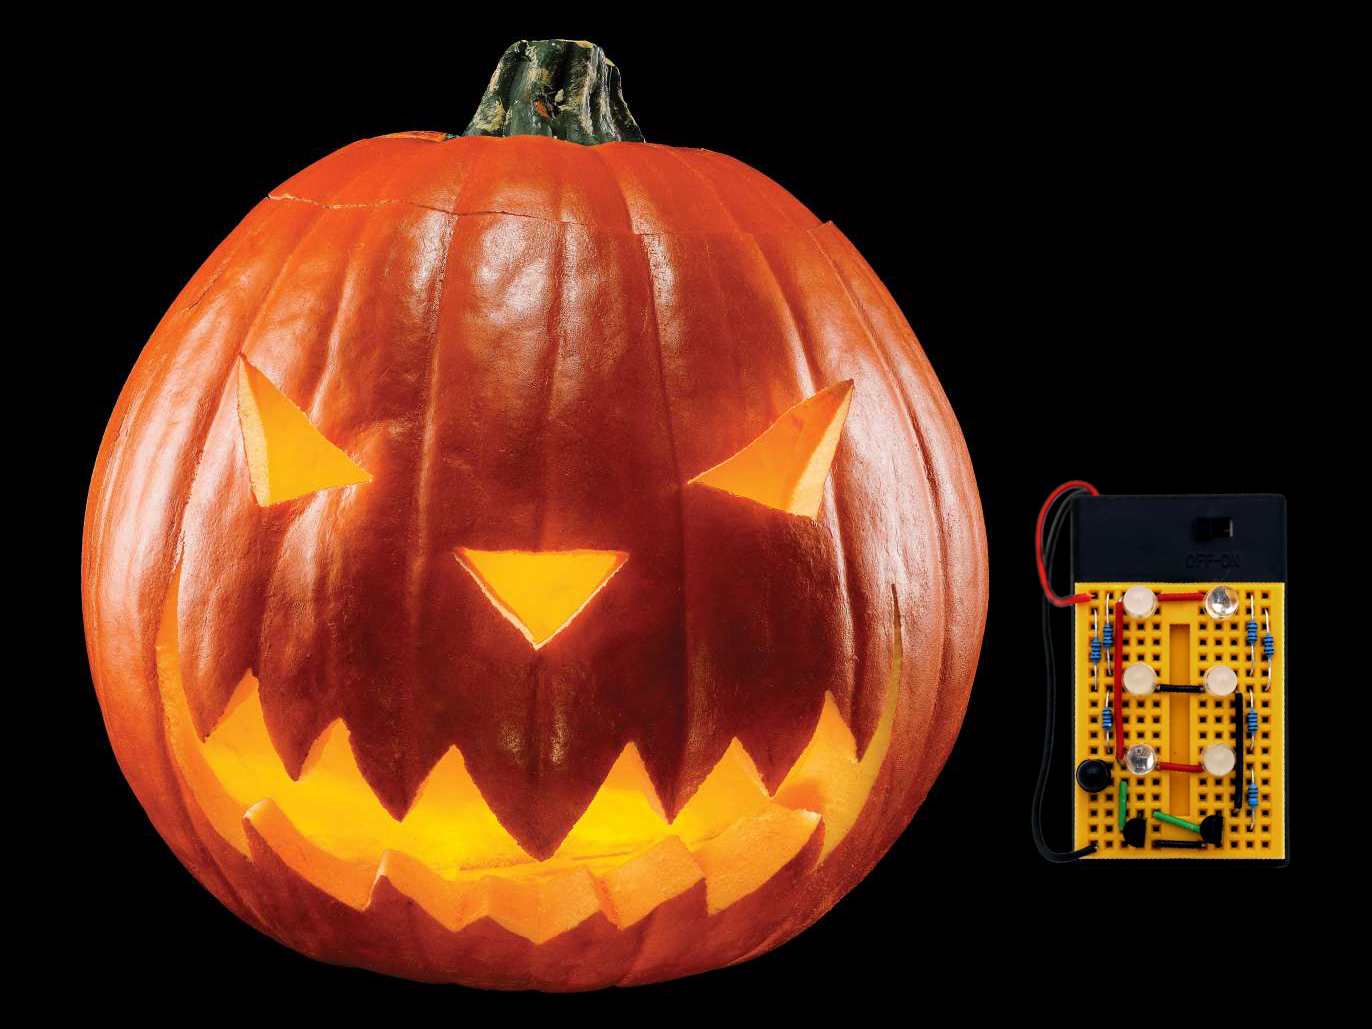 Complete "Hack-o'-lantern" and mini breadboard that goes inside